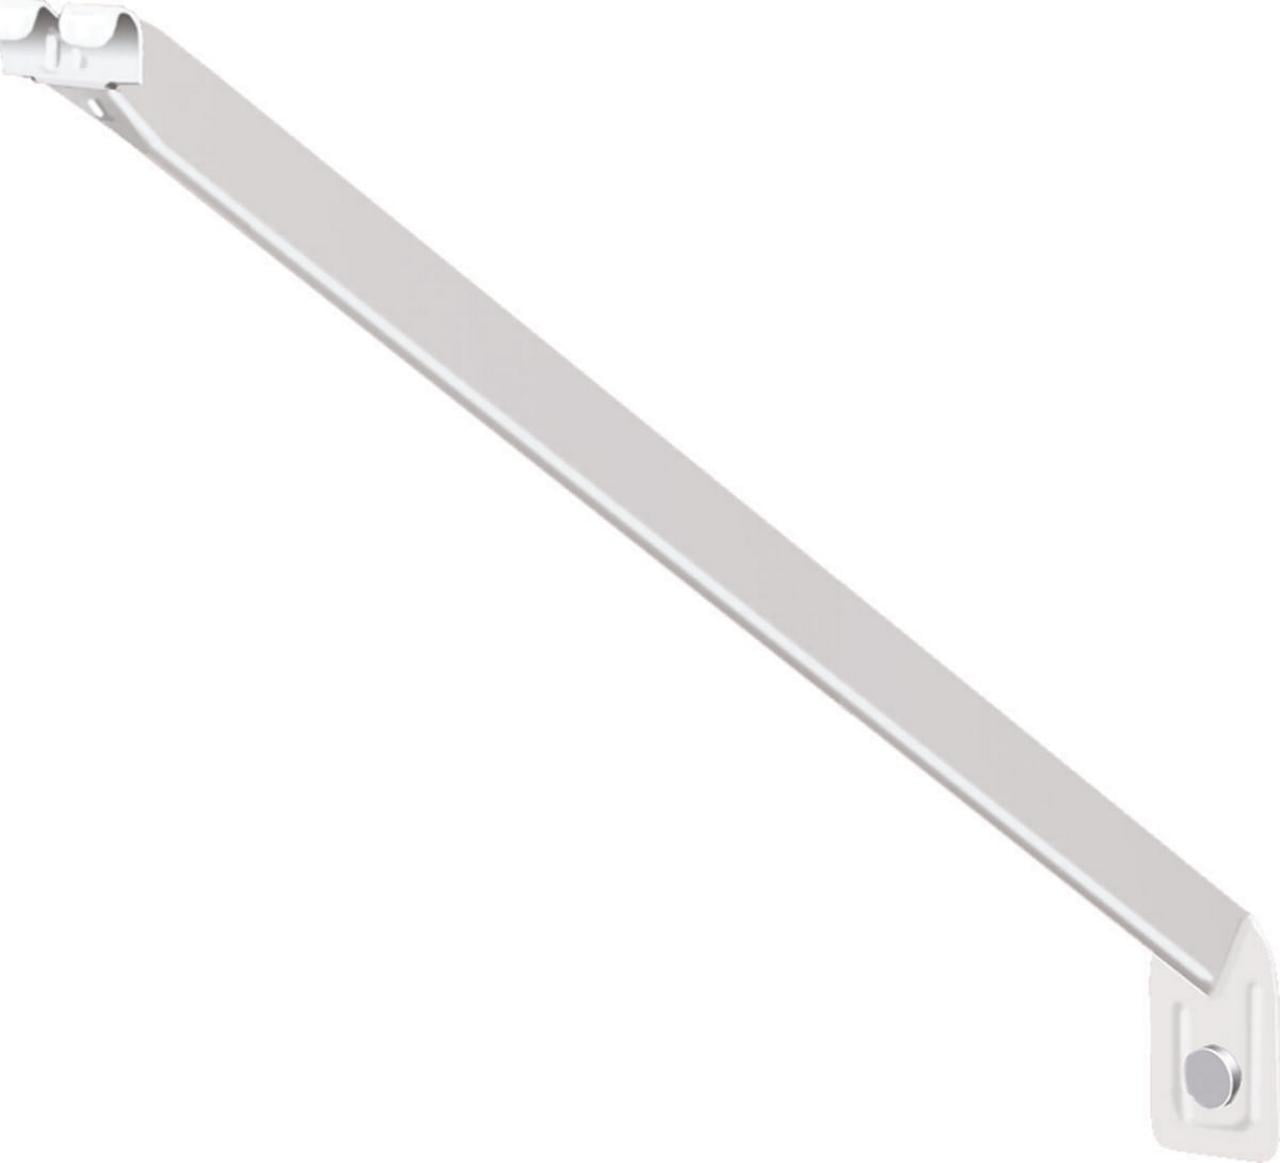 6605 NEW ClosetMaid White Support Bracket For Any 20" Wire Shelf Part No 